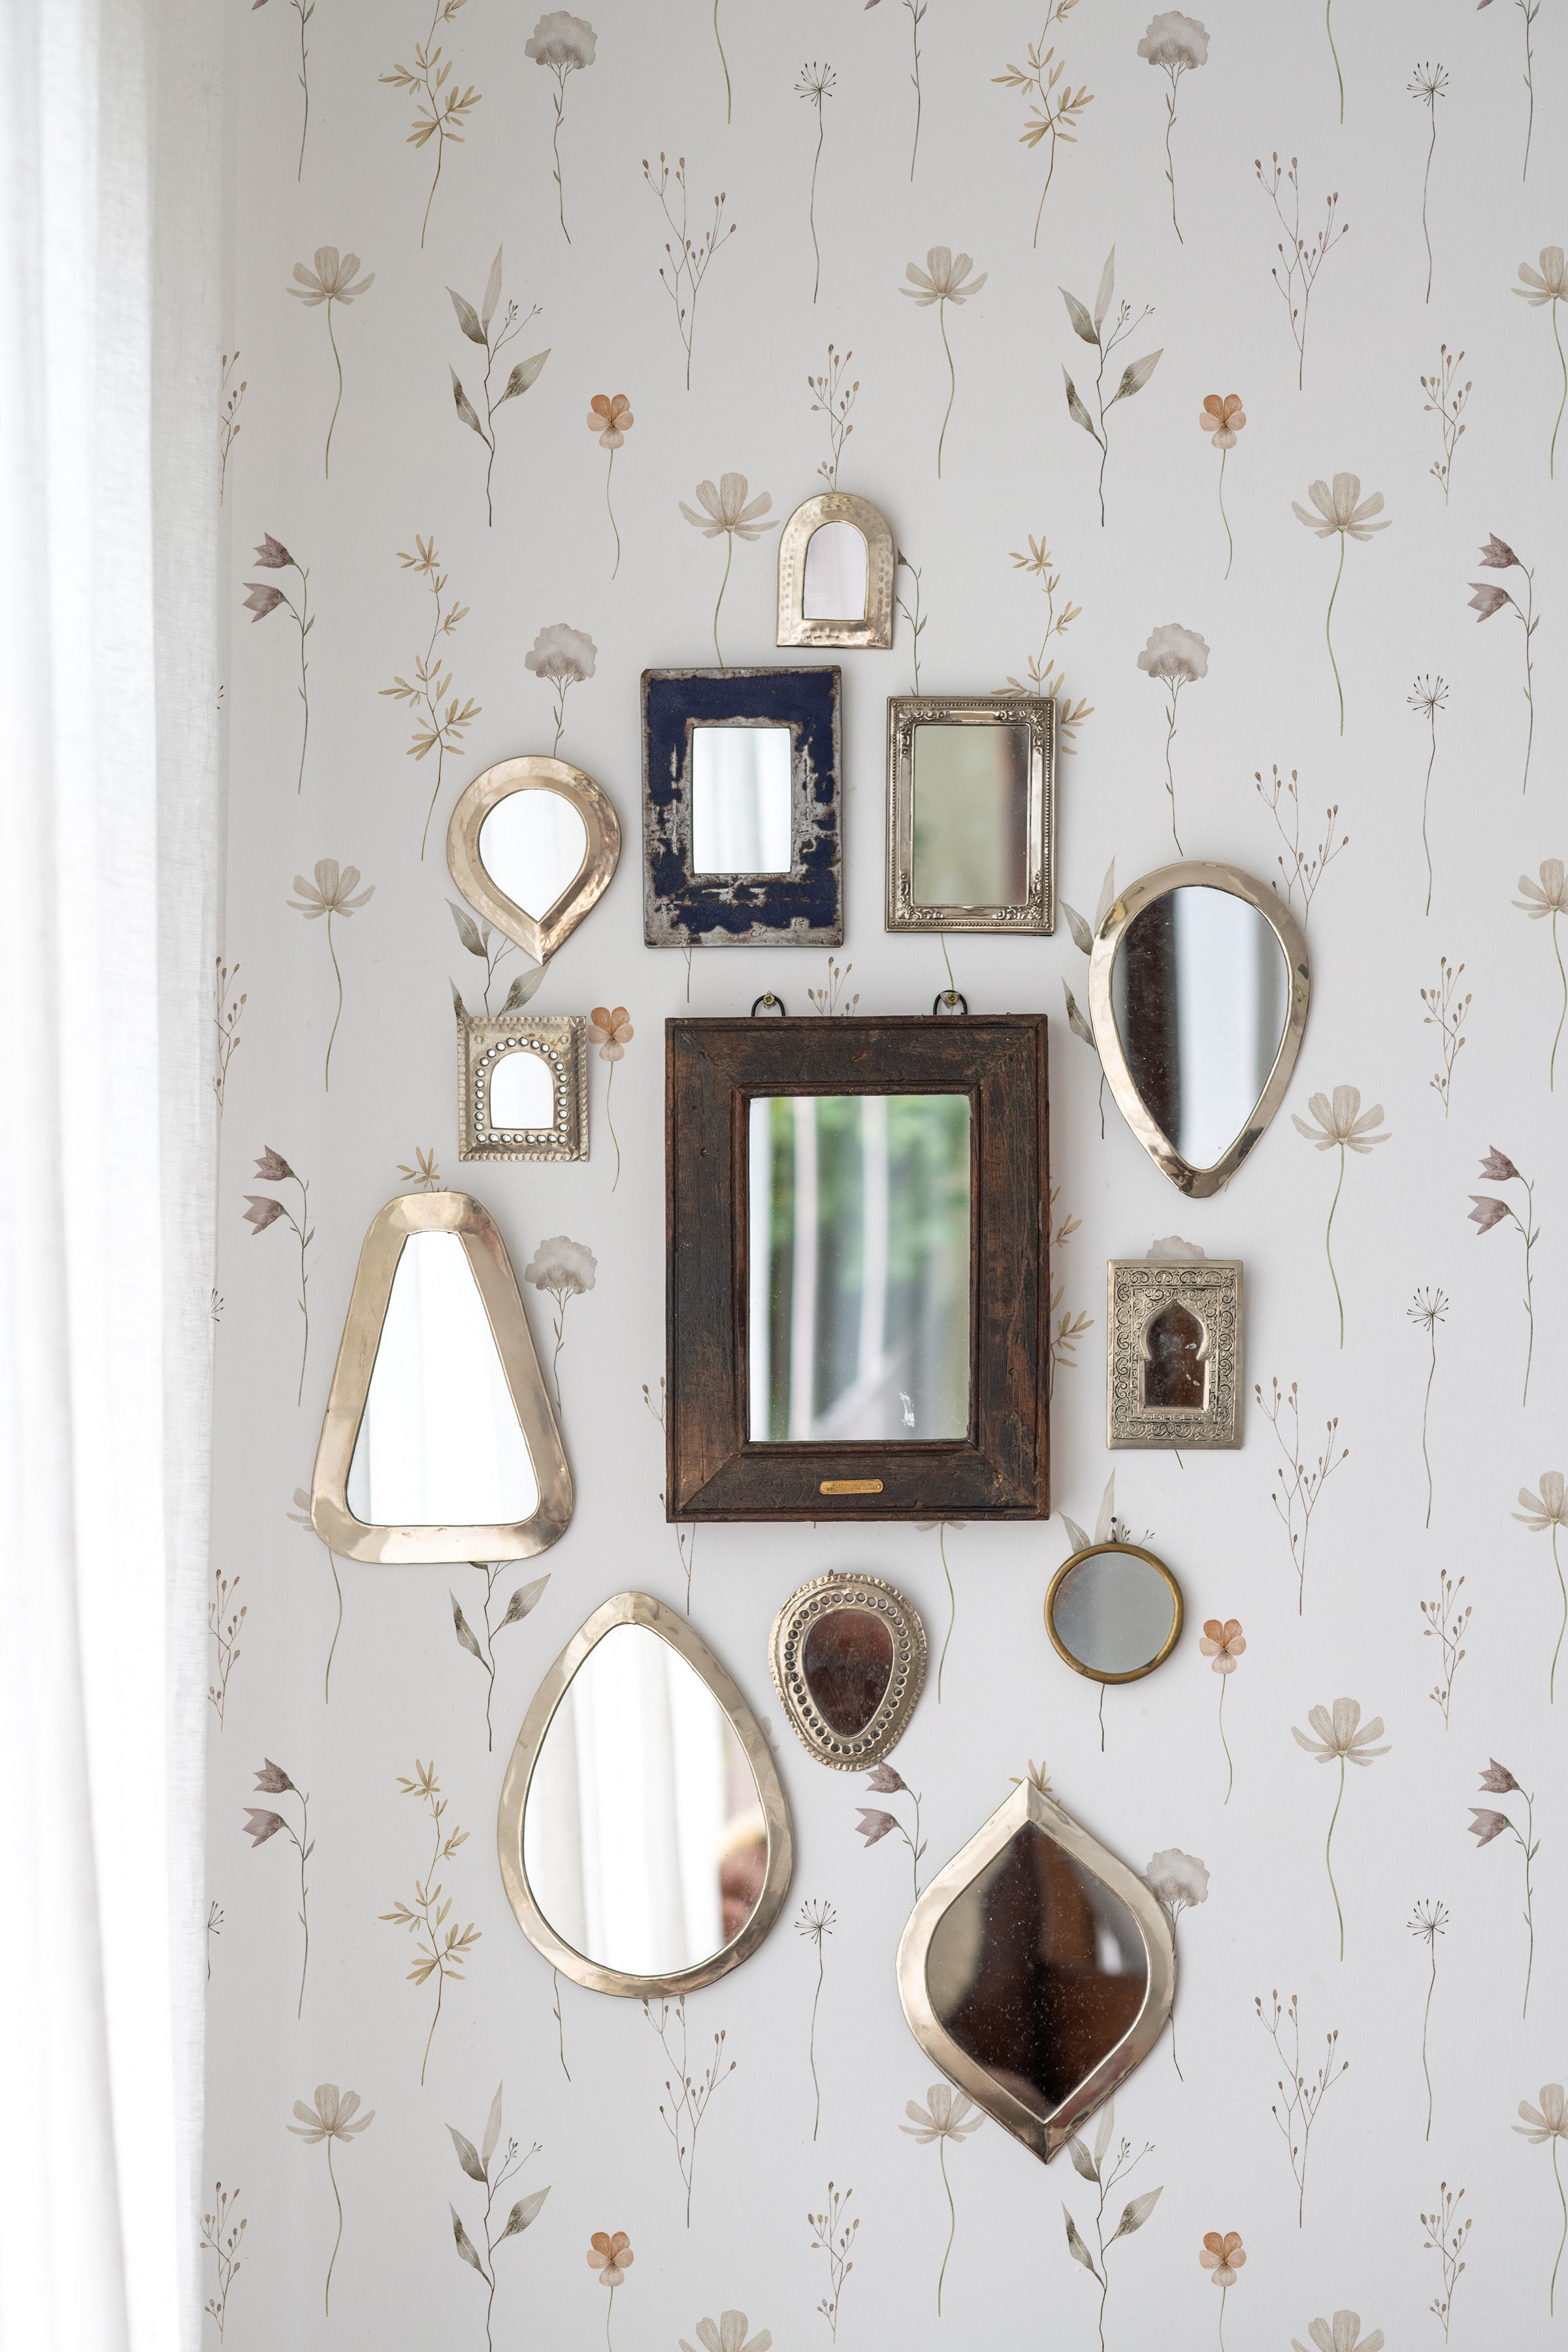 An artistic wall arrangement of variously shaped vintage mirrors reflecting different angles of the room, set against 'Muted Floral Wallpaper' with subtle floral designs that evoke a sense of calm elegance.